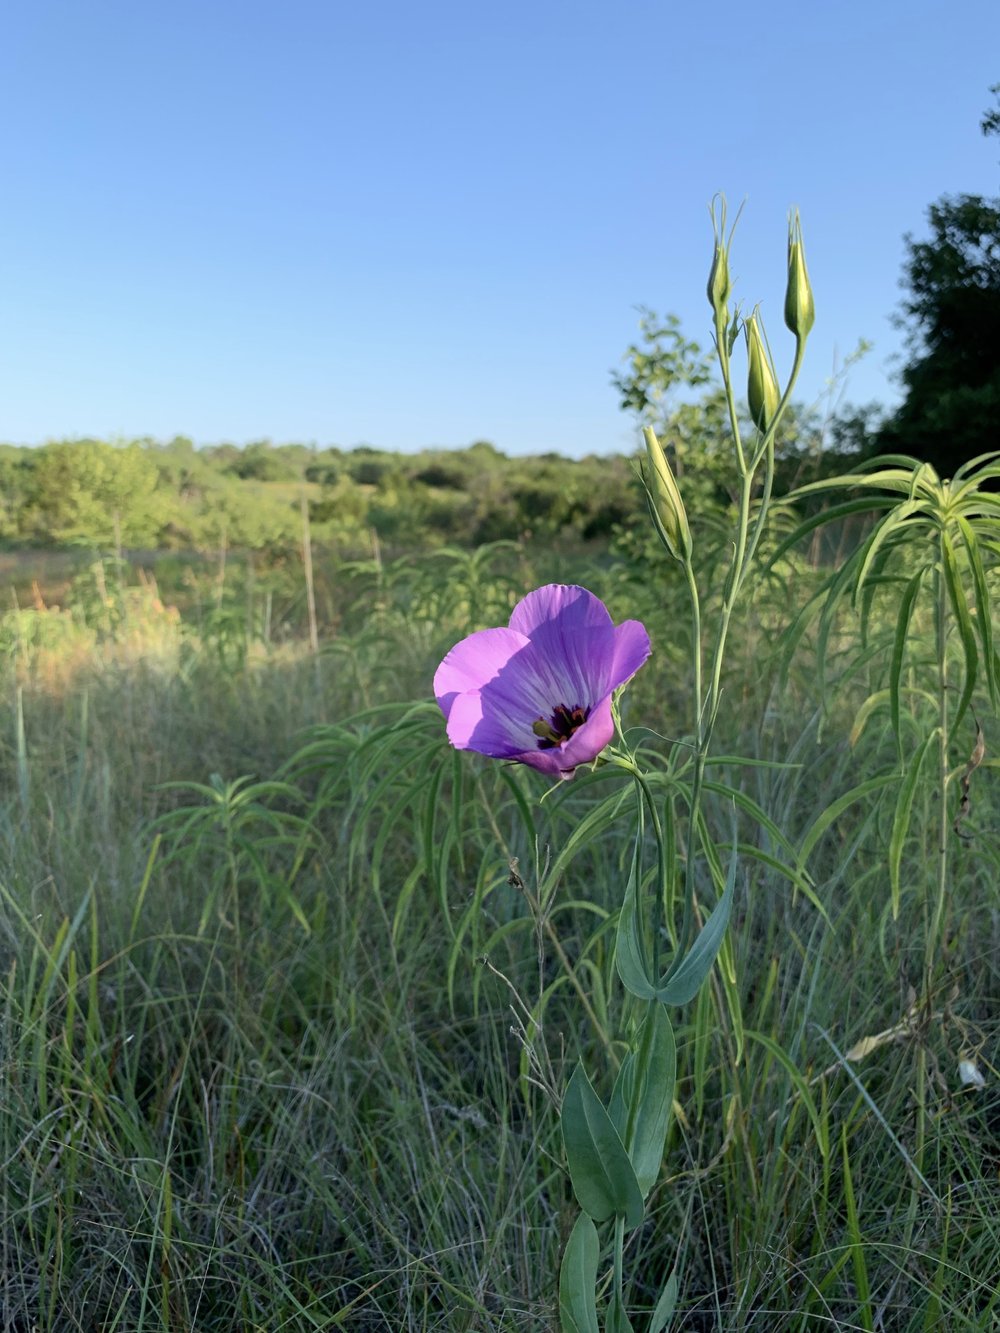  Right on schedule, I came across the first blooms of  Showy Prairie Gentian  ( Eustoma russellianum ) on 6/25. Previously known as Texas Bluebells, they are indeed one of the showiest summer wildflowers.  